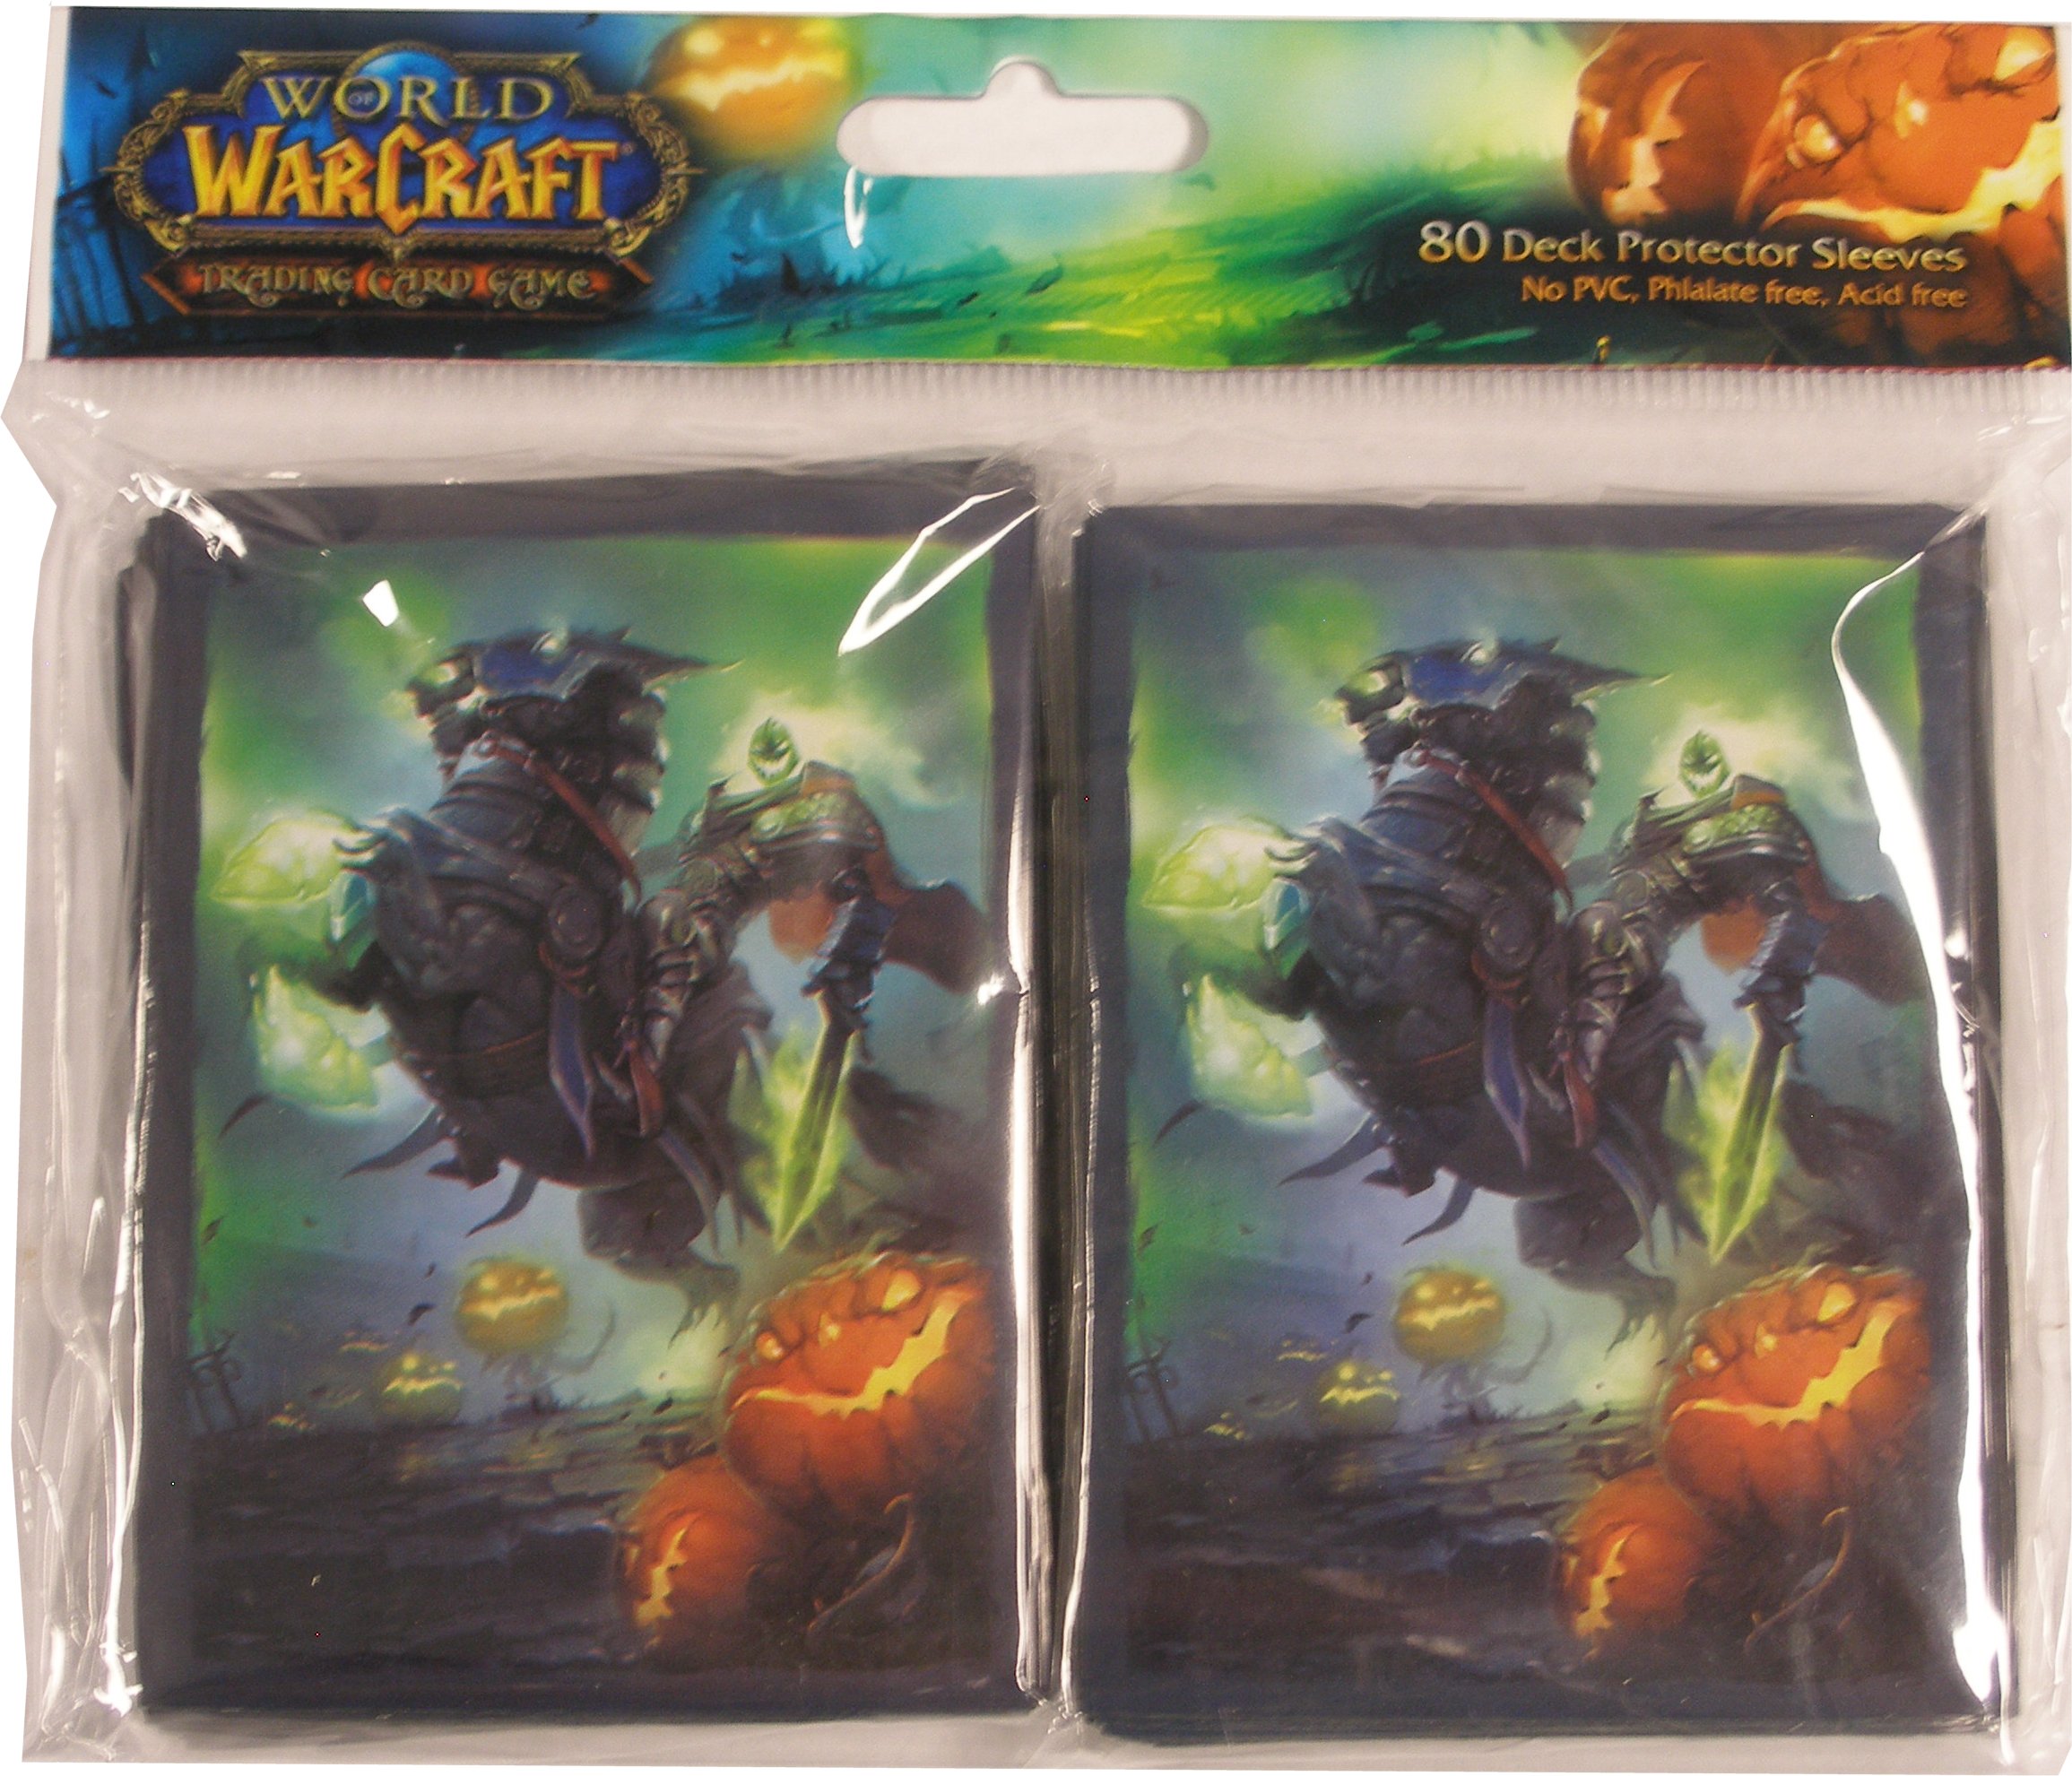 World of Warcraft trading cards game TCG Succubus Sleeves 80ct pack by Cryptozoi